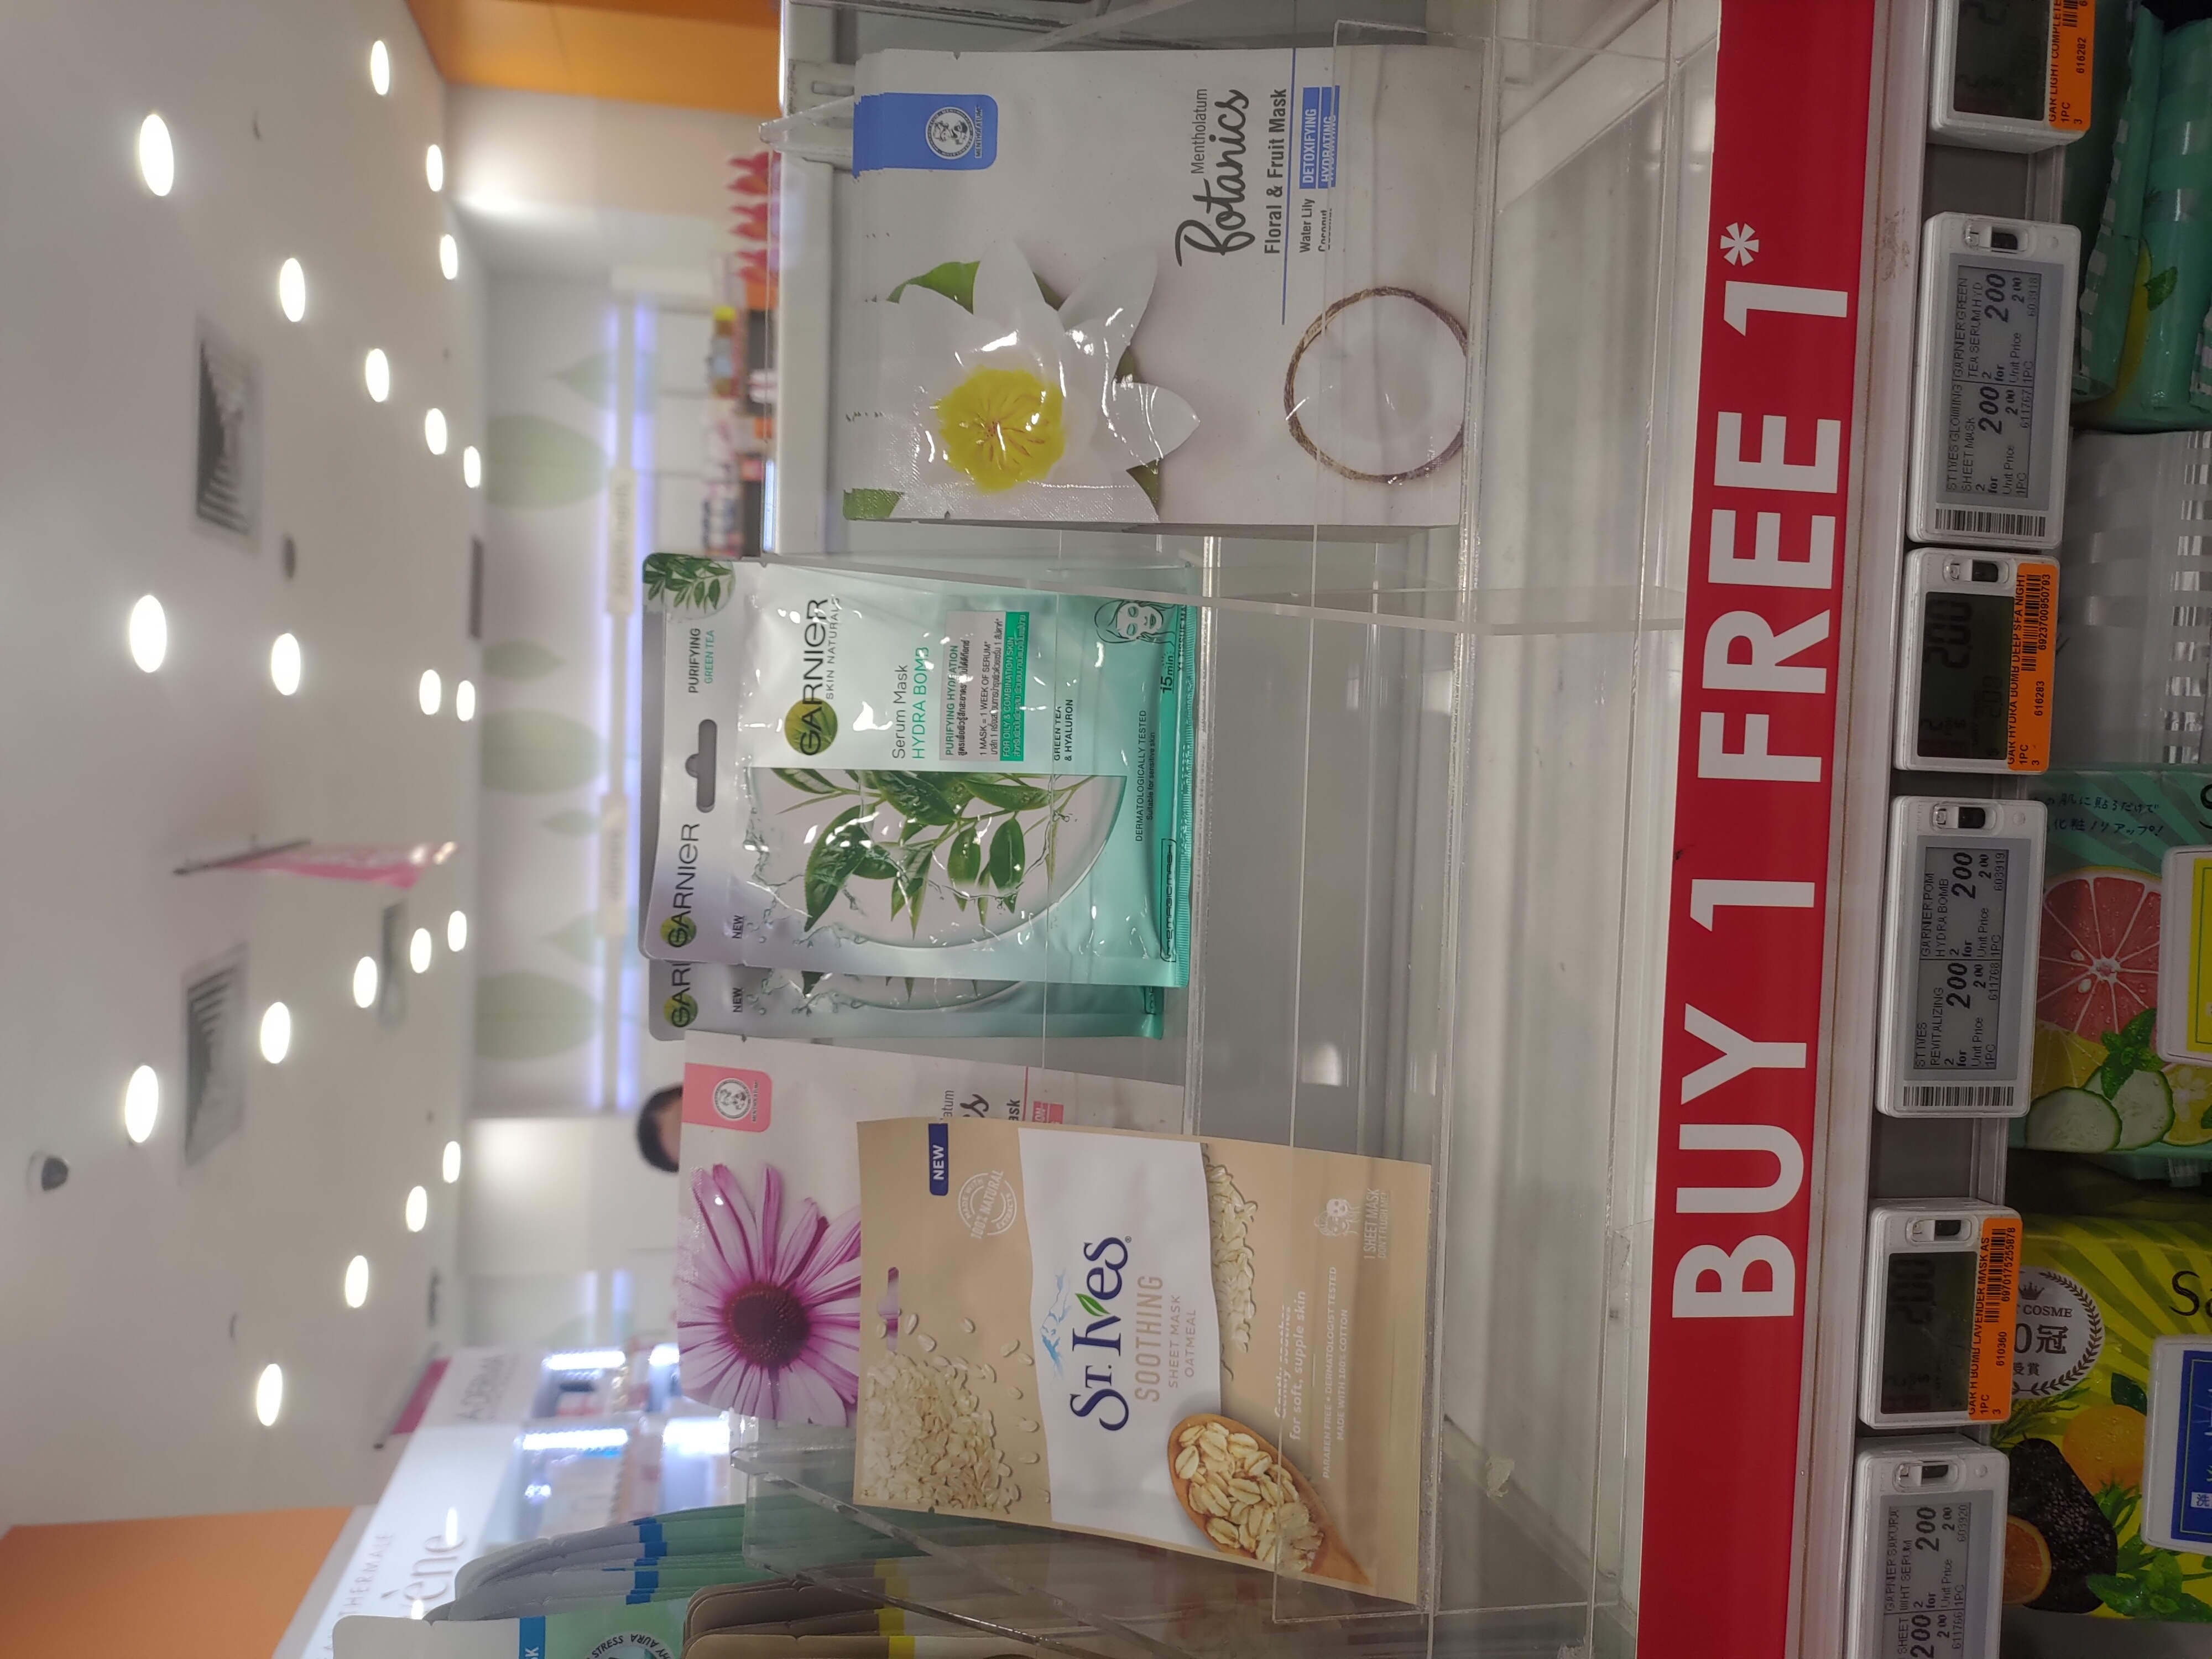 Guardian offering BUY 1 GET 1 FREE on all facial masks and cleansers from now till 1 Nov 20 - 8